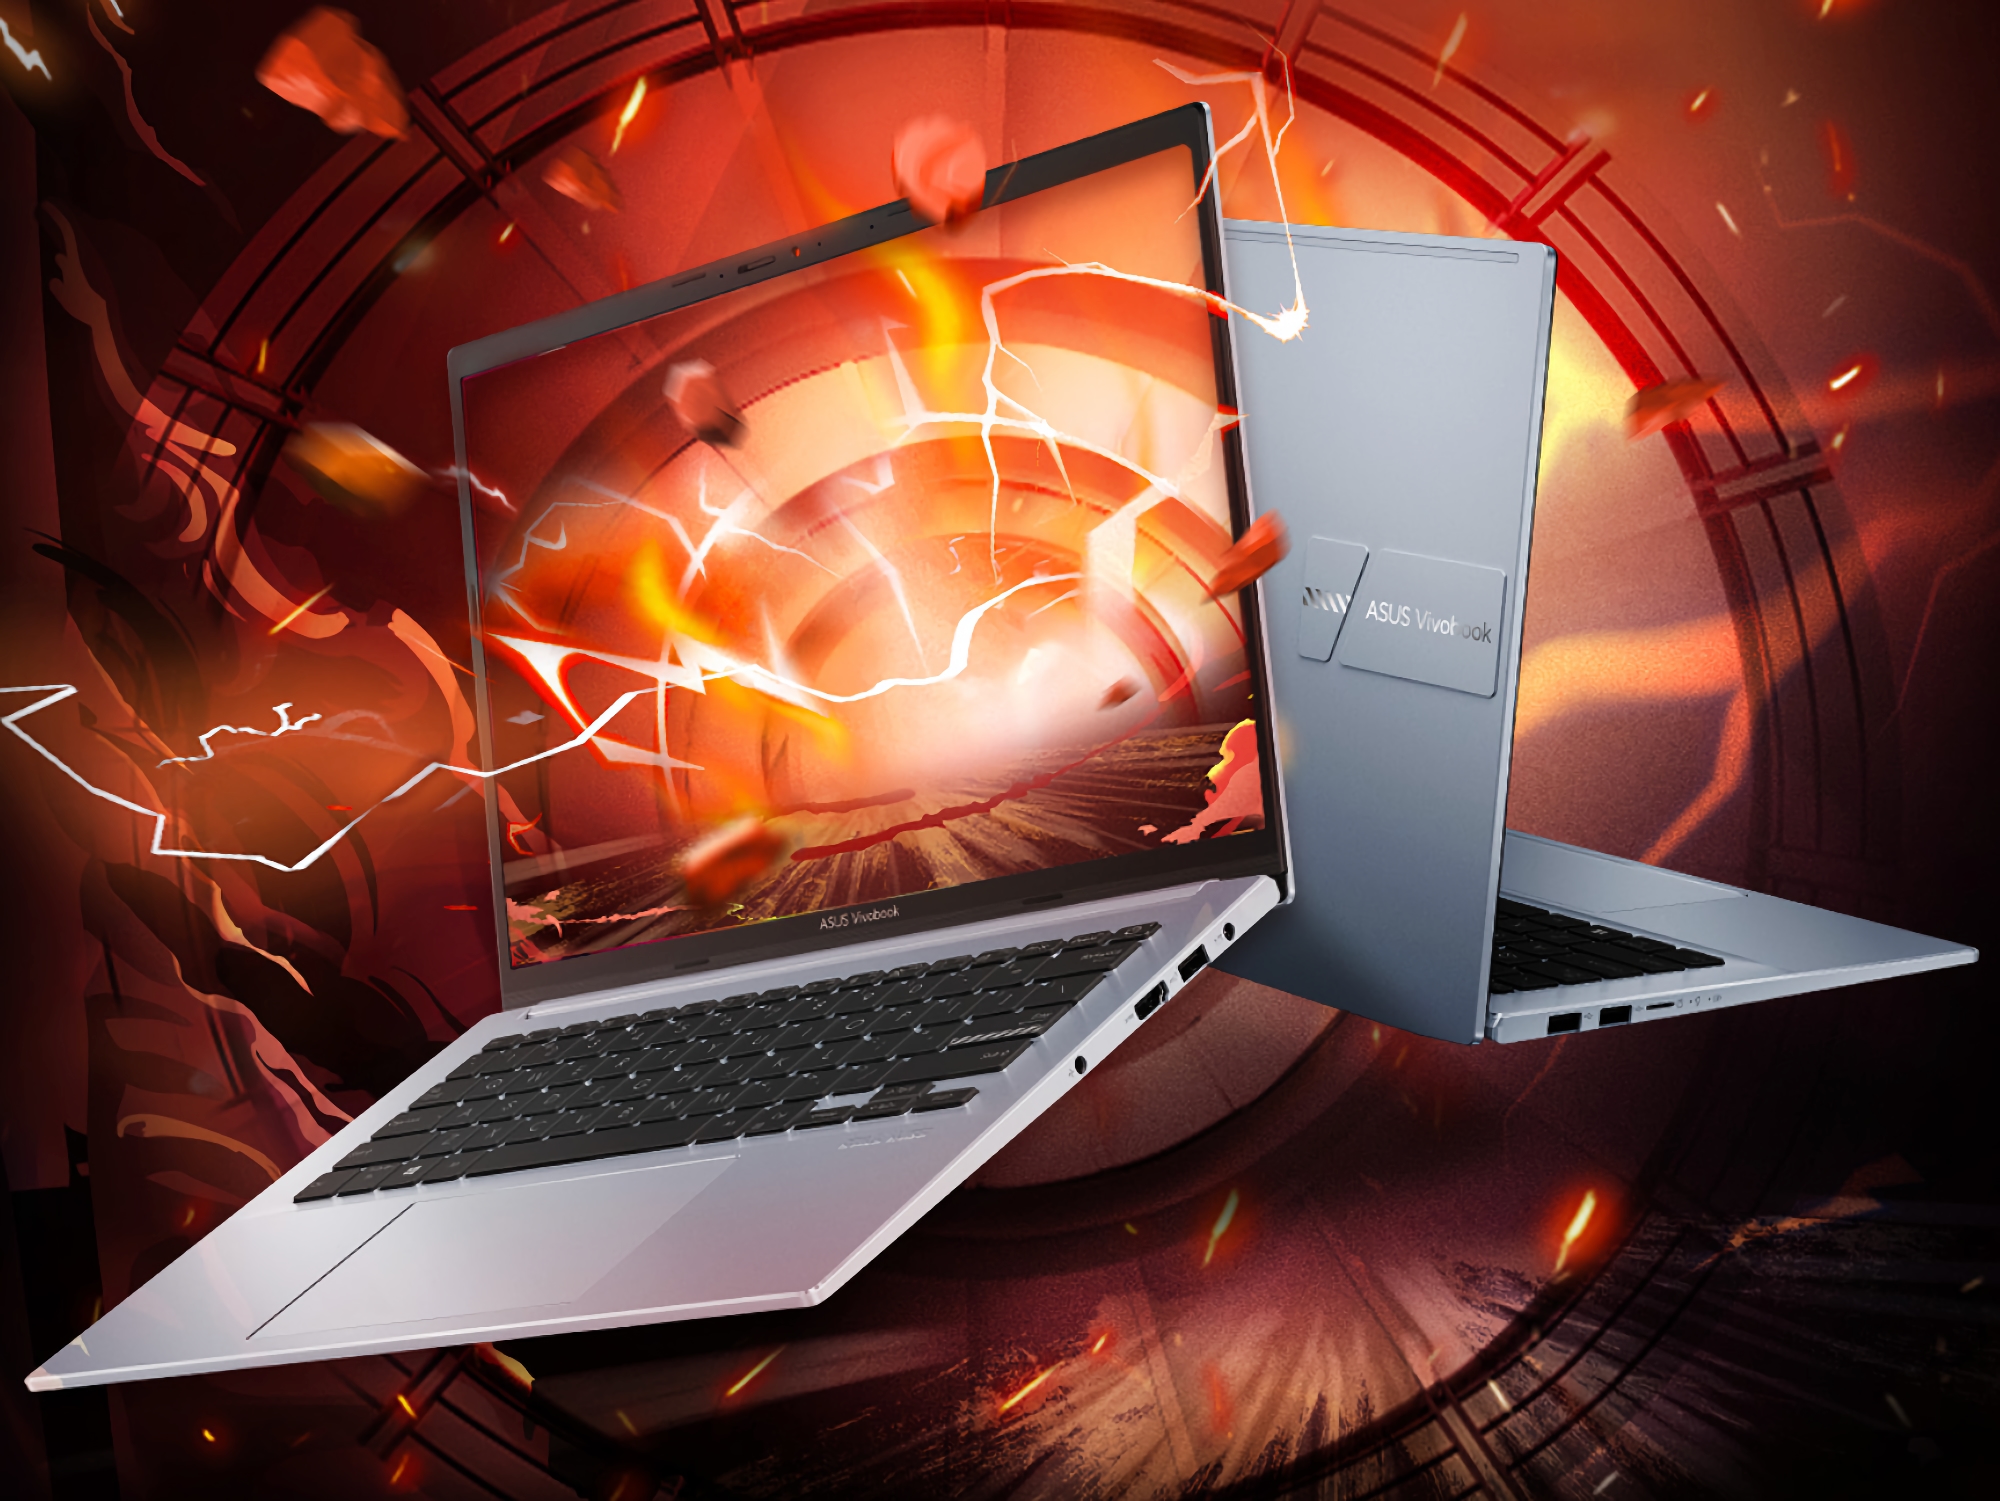 ASUS VivoBook Pro 14: thin and light laptop with OLED screen and AMD Ryzen chips for $710